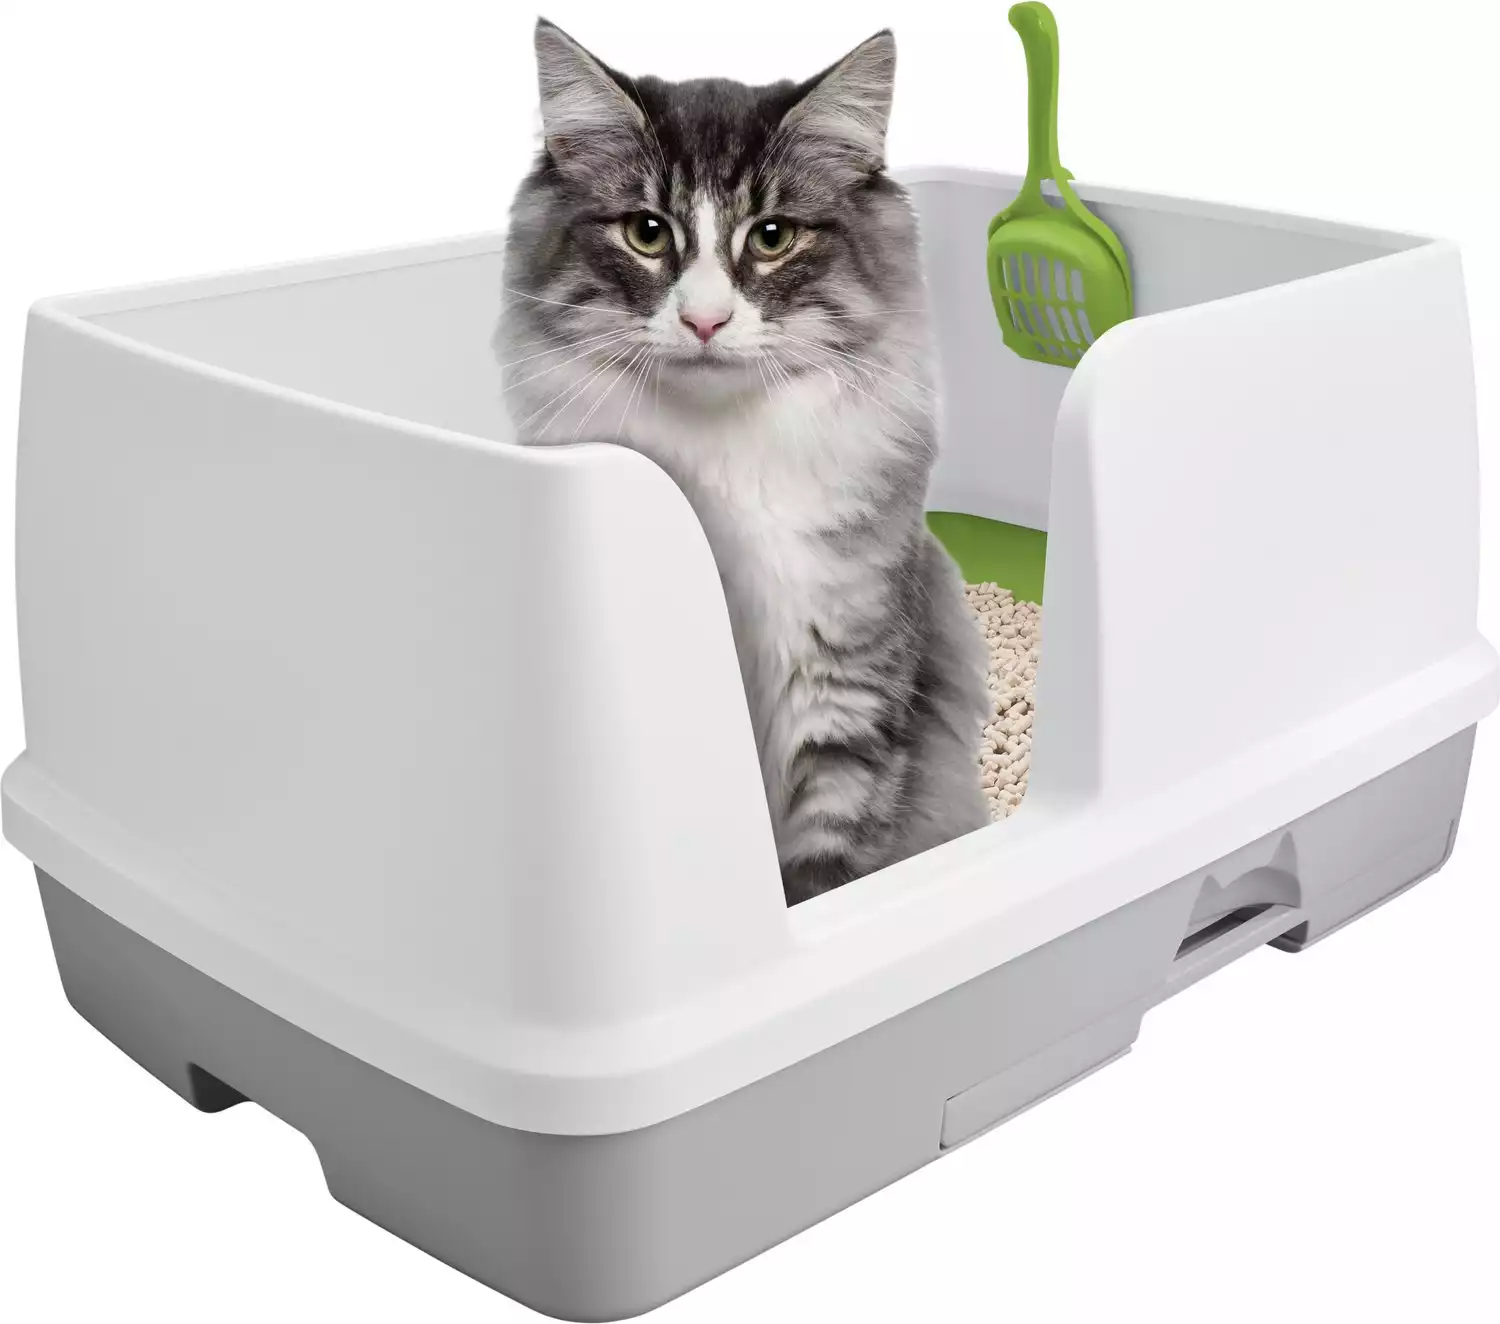 Purina Tidy Cats Breeze XL All-In-One Cat Litter Box System